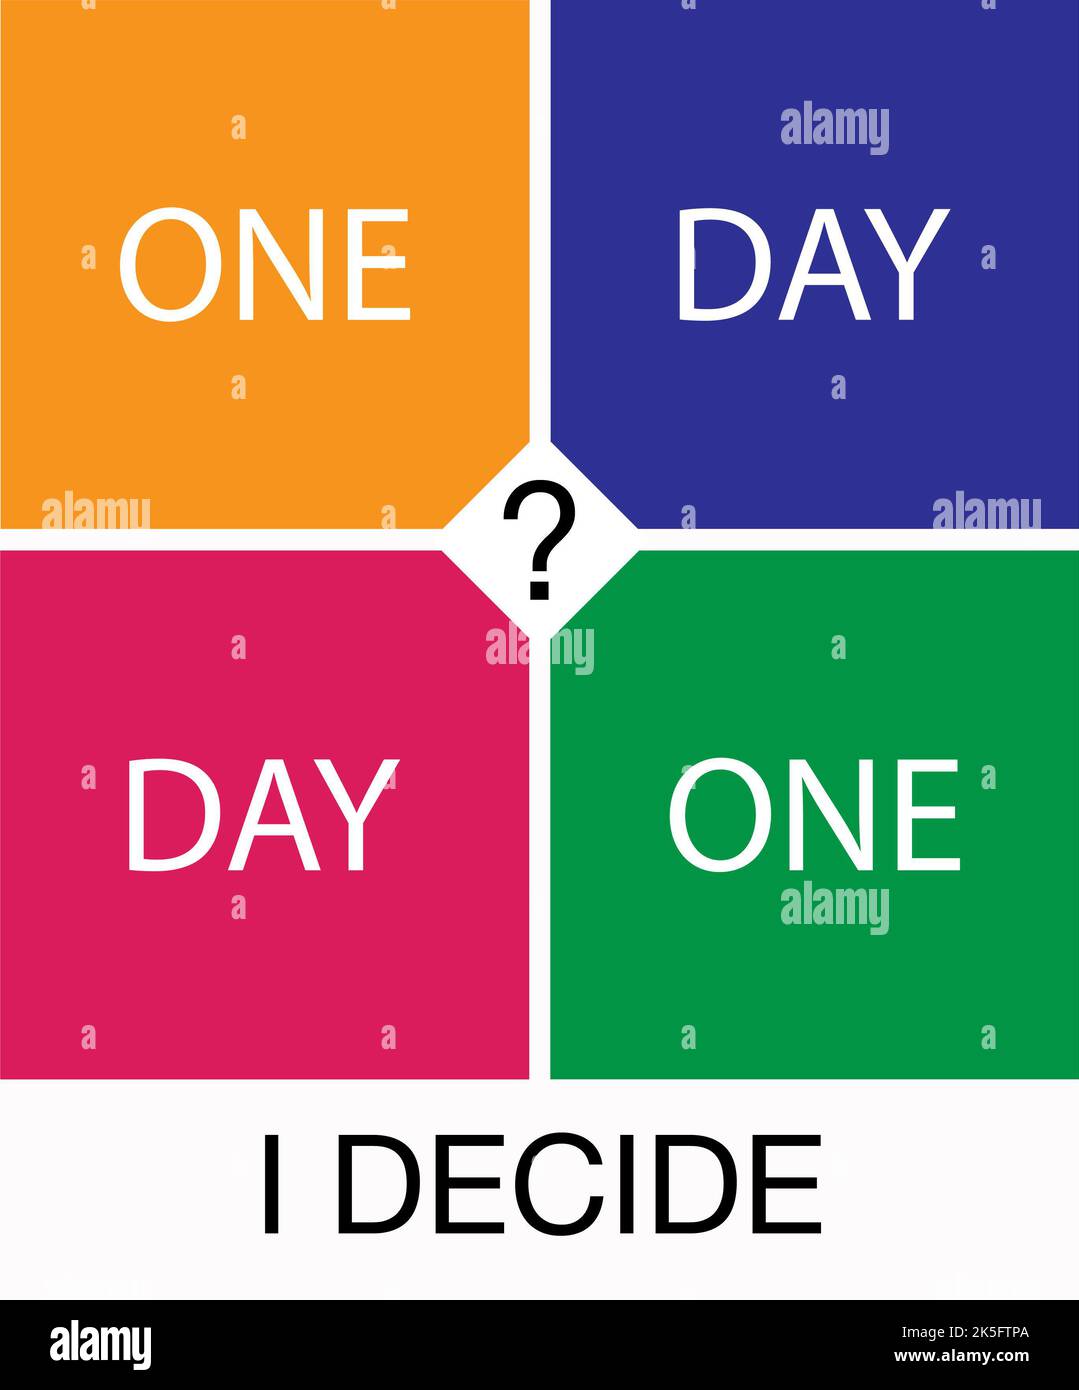 One Day Or Day One. I Decide. Inspiring motivation quote. Stock Photo